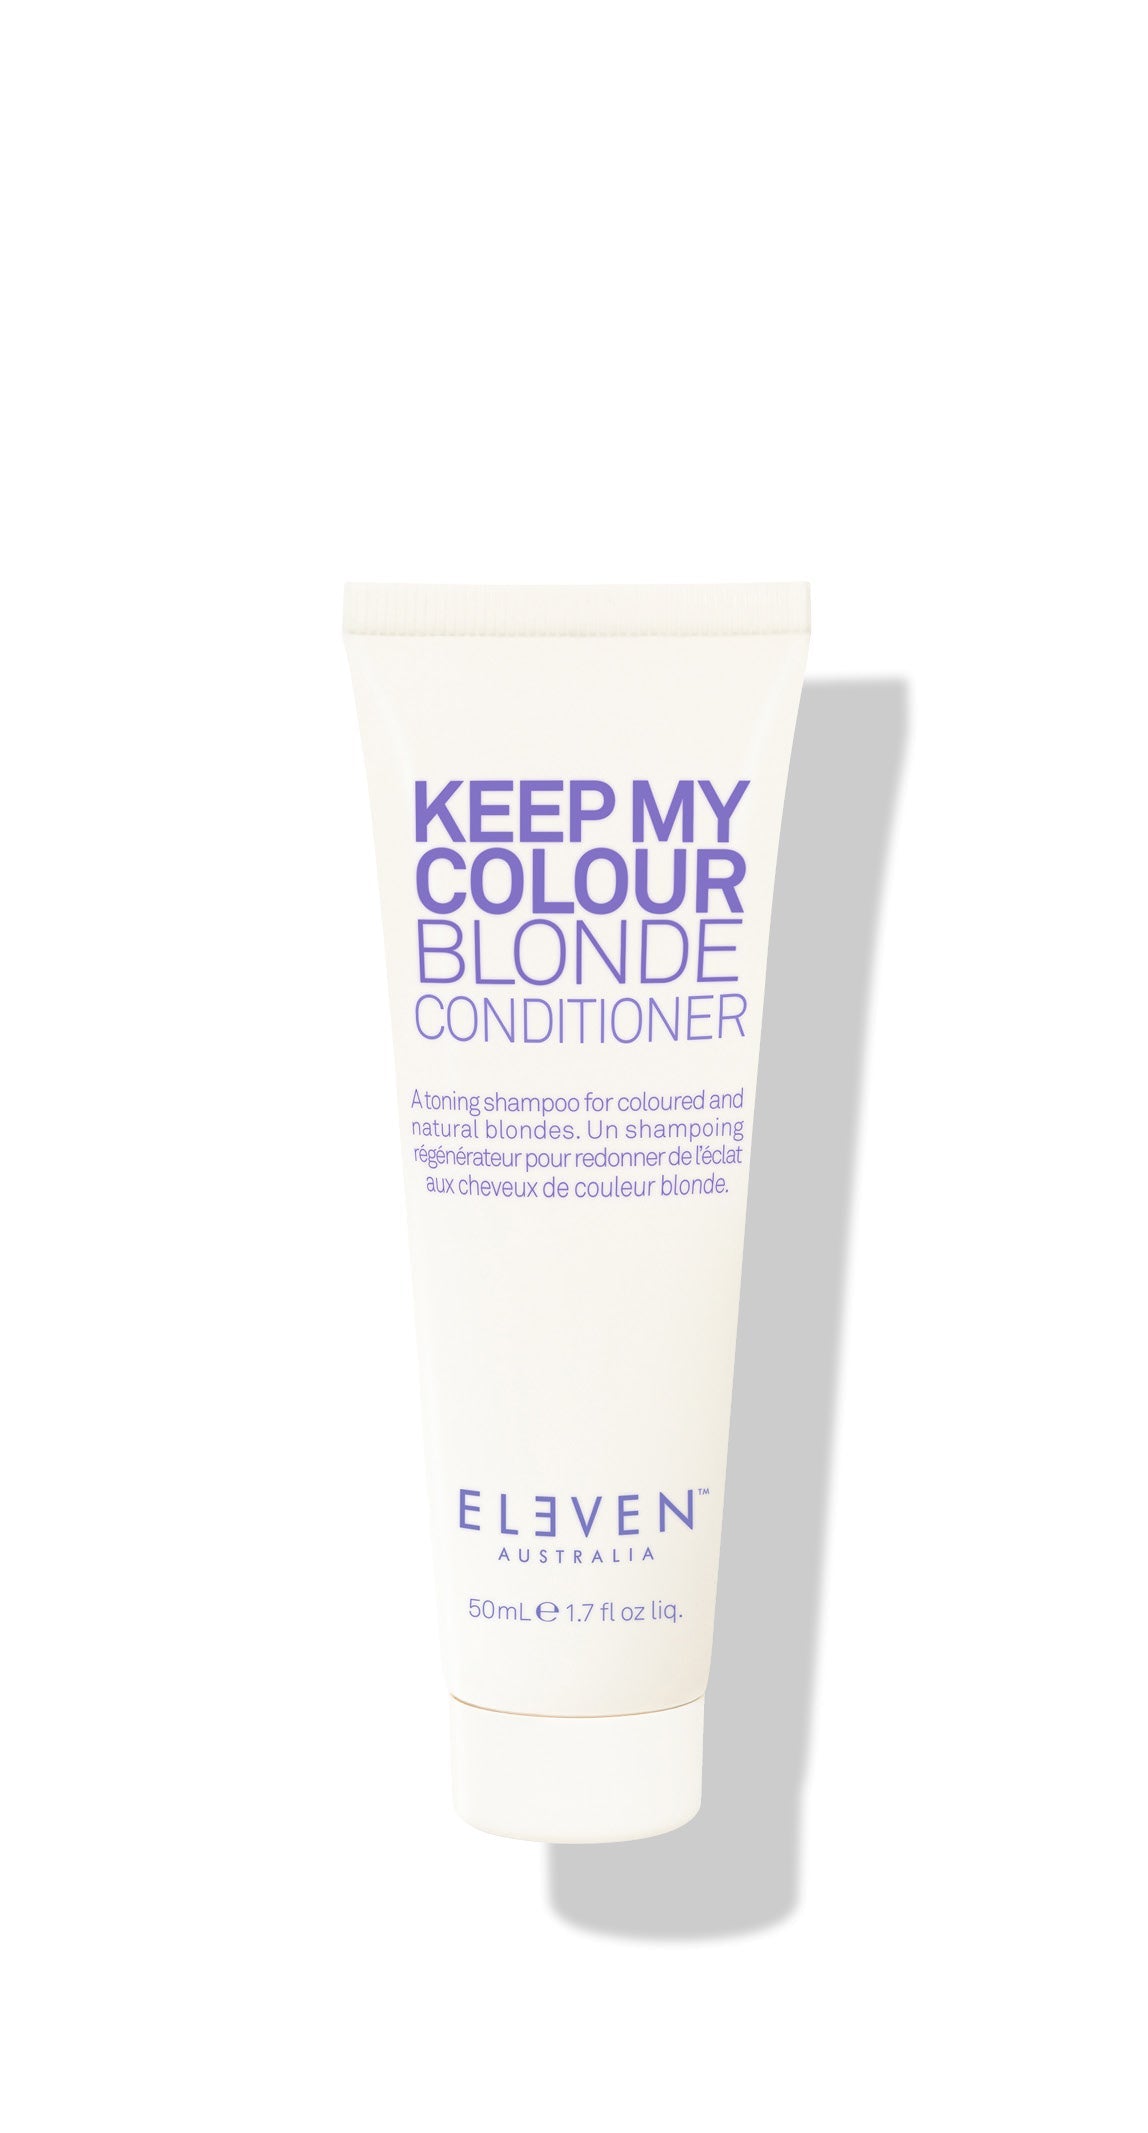 KEEP MY COLOUR BLONDE CONDITIONER 50ML